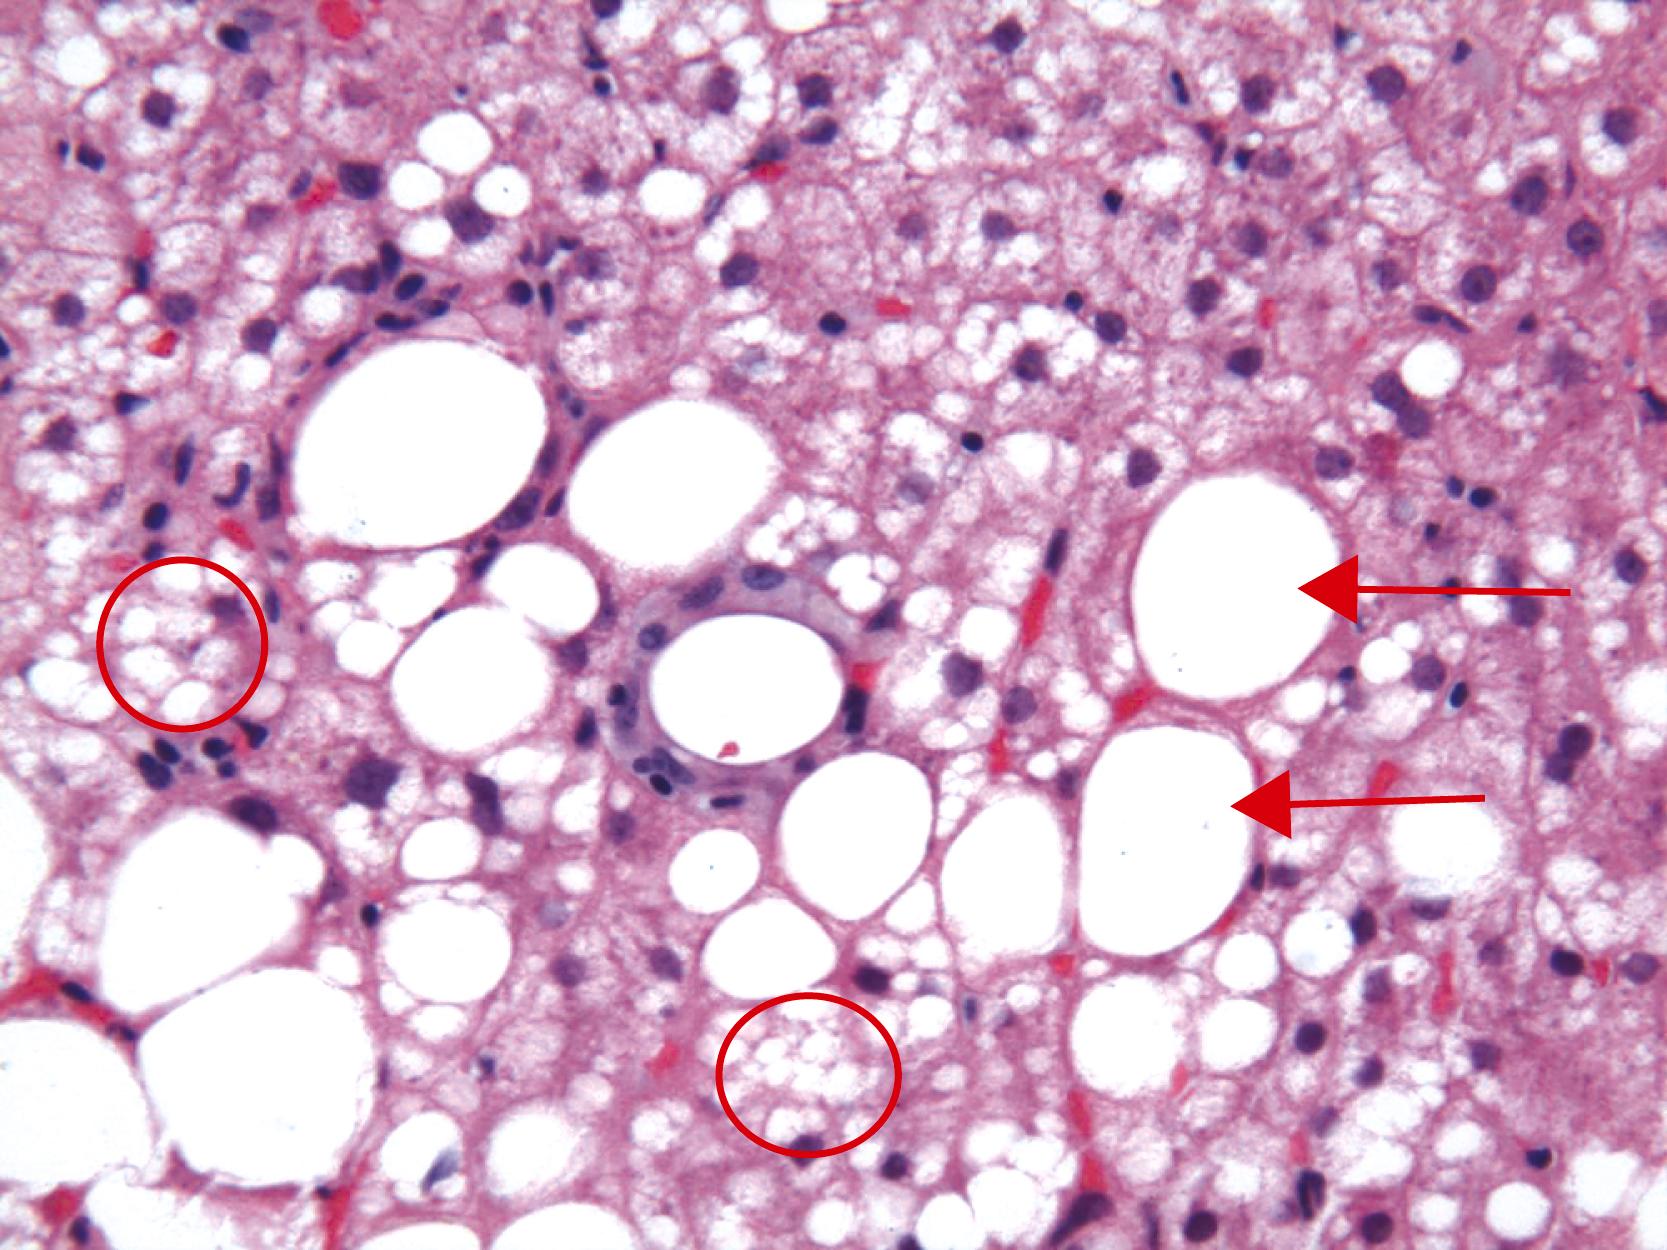 FIGURE 50.3, Mixed large ( arrows )- and small (circles)-droplet macrovesicular steatosis. Each of the two lipogranulomas (center) consists of a single droplet of fat surrounded by pigmented Kupffer cells.